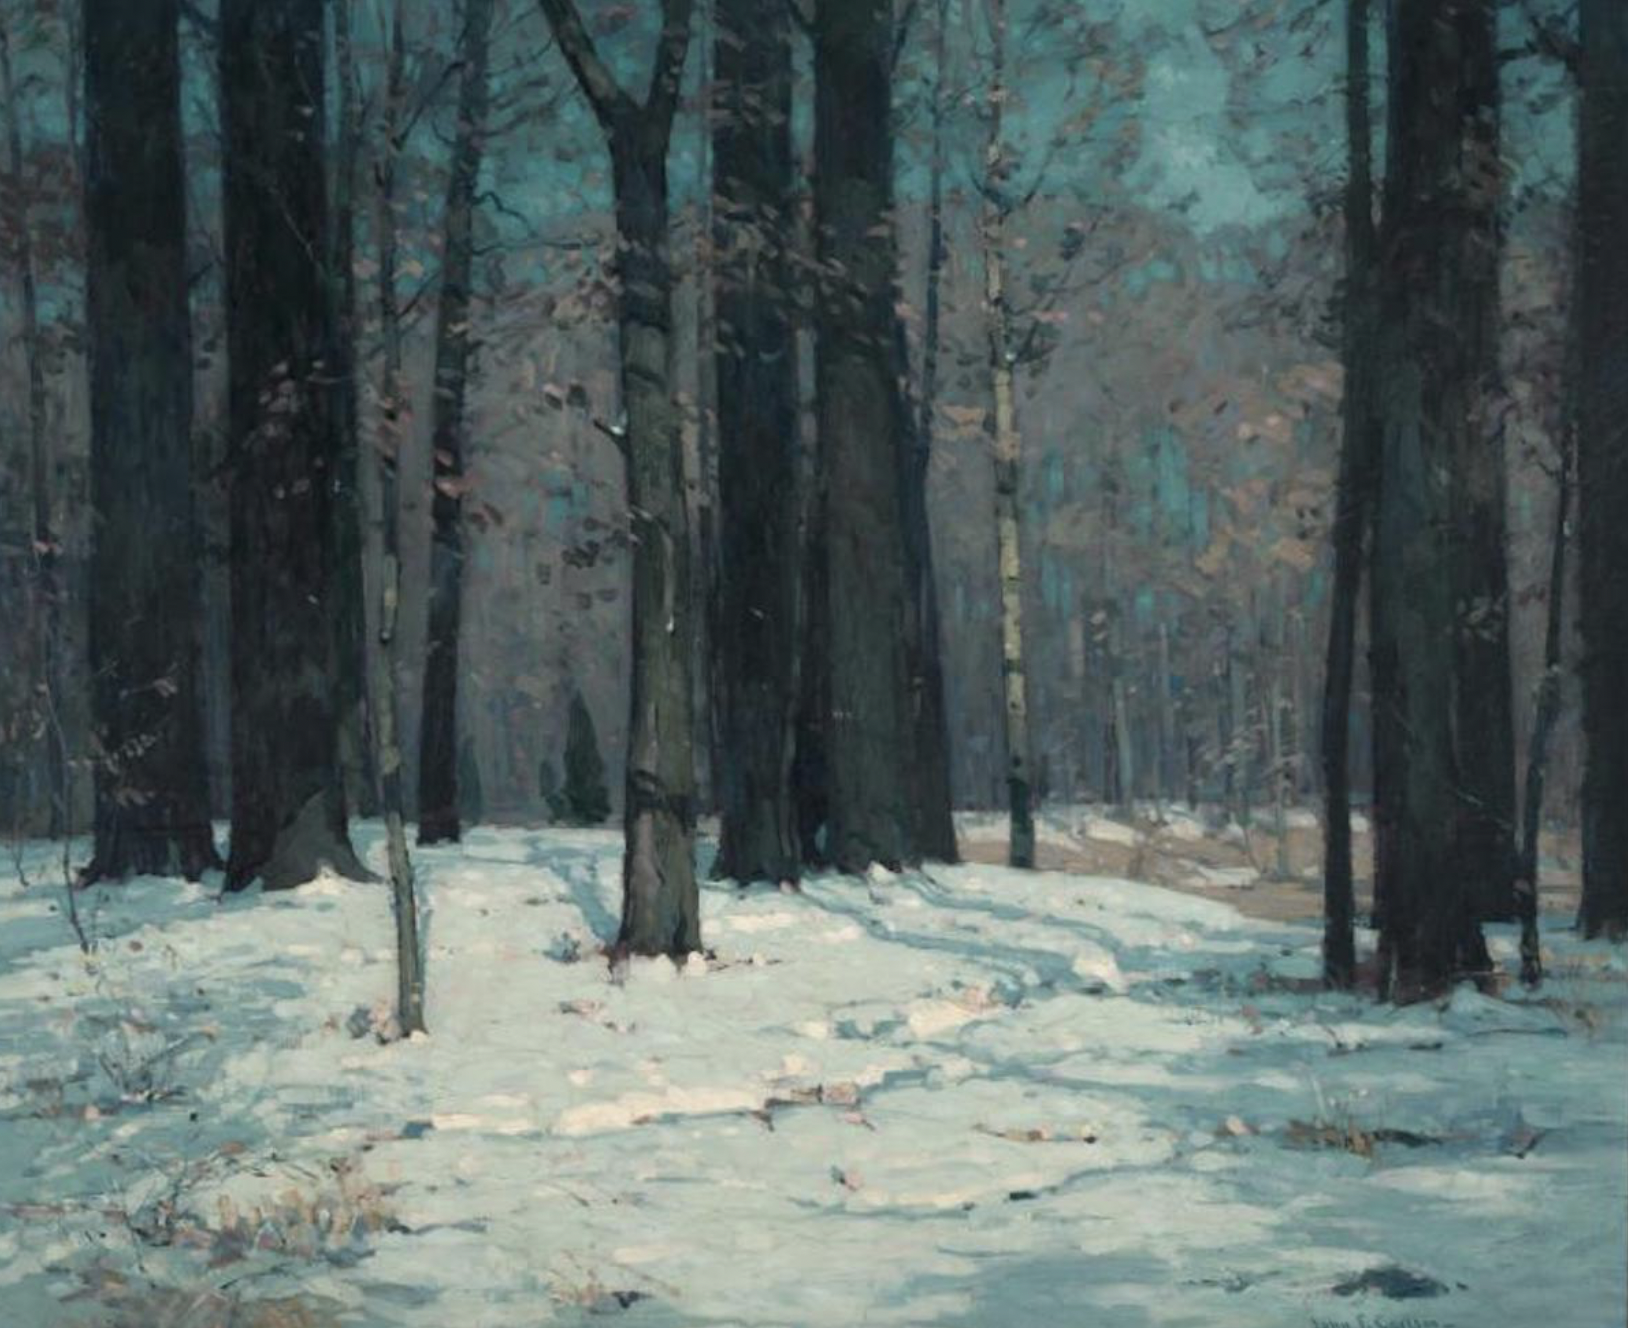 John F. Carlson, "Woods in Winter," ca. 1912, oil on canvas, 117.2 x 142.6 cm, Smithsonian American Art Museum, Gift from the Trustees of the Corcoran Gallery of Art (Museum Purchase, Gallery Fund), Washington, DC, USA